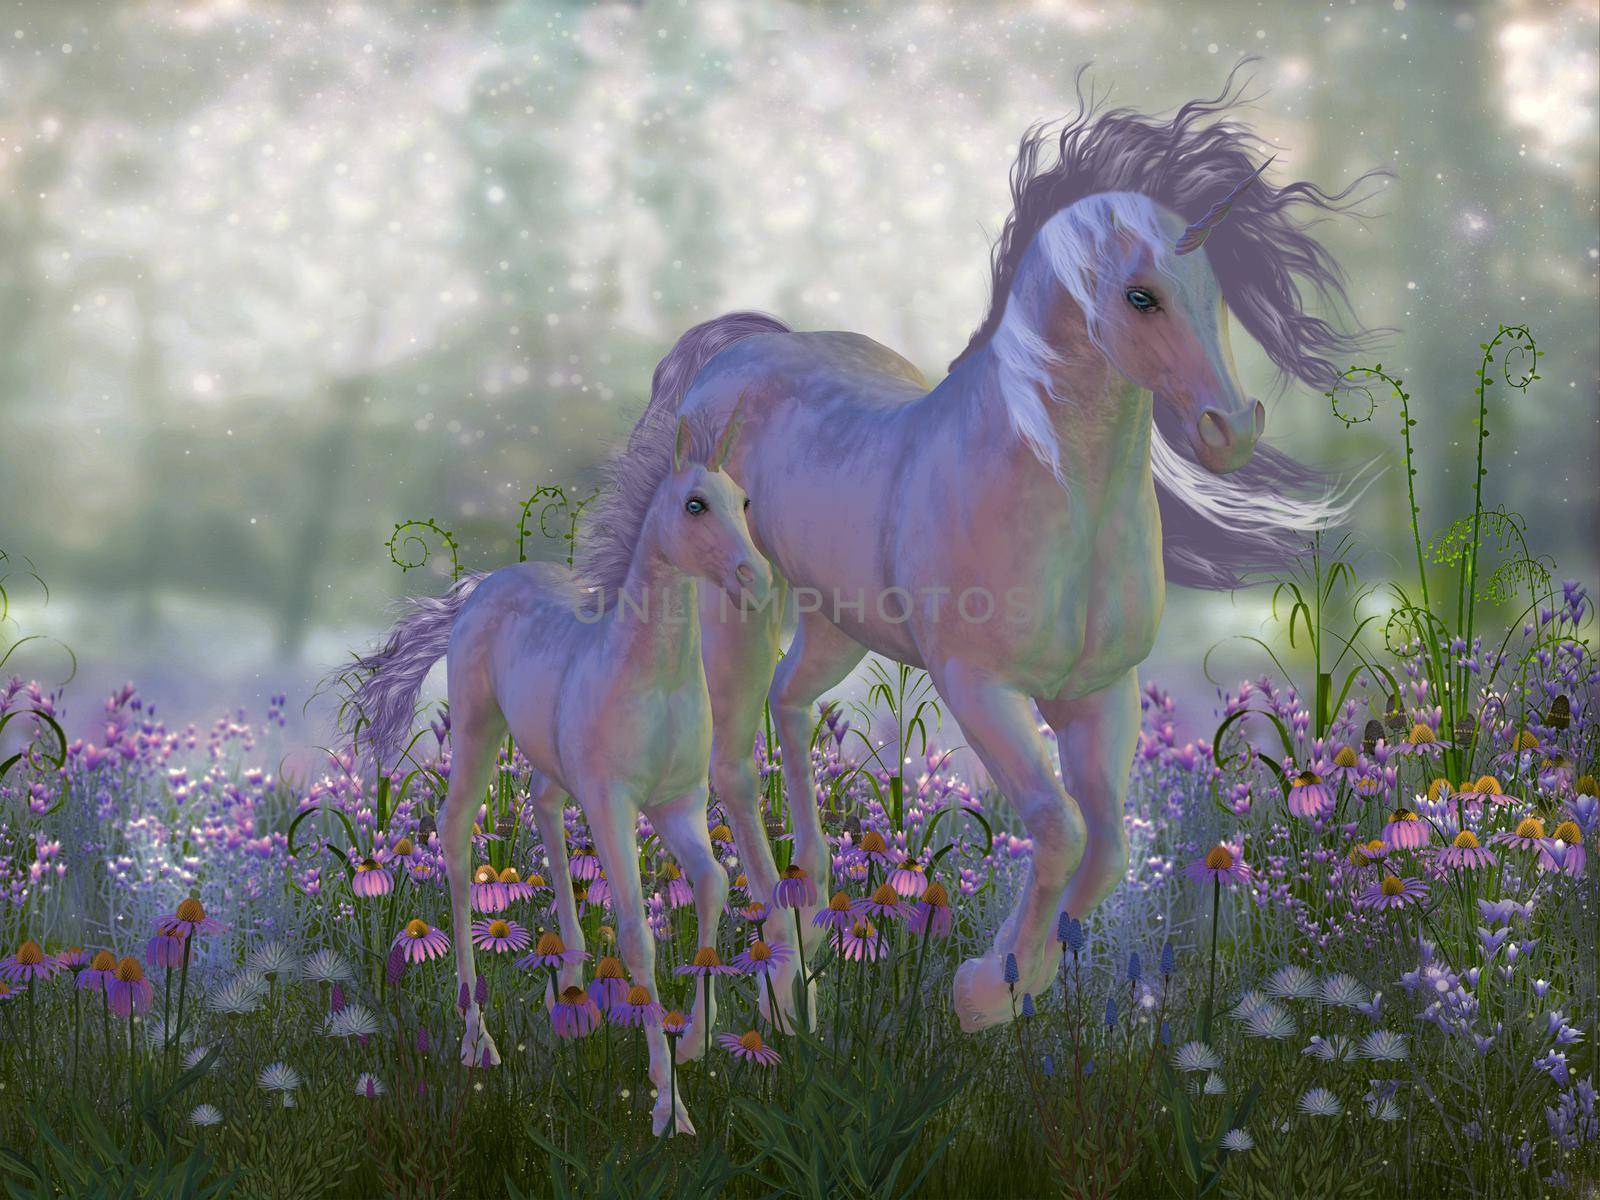 A unicorn is a legendary creature that inhabits magical forests and has a single horn on its forehead.